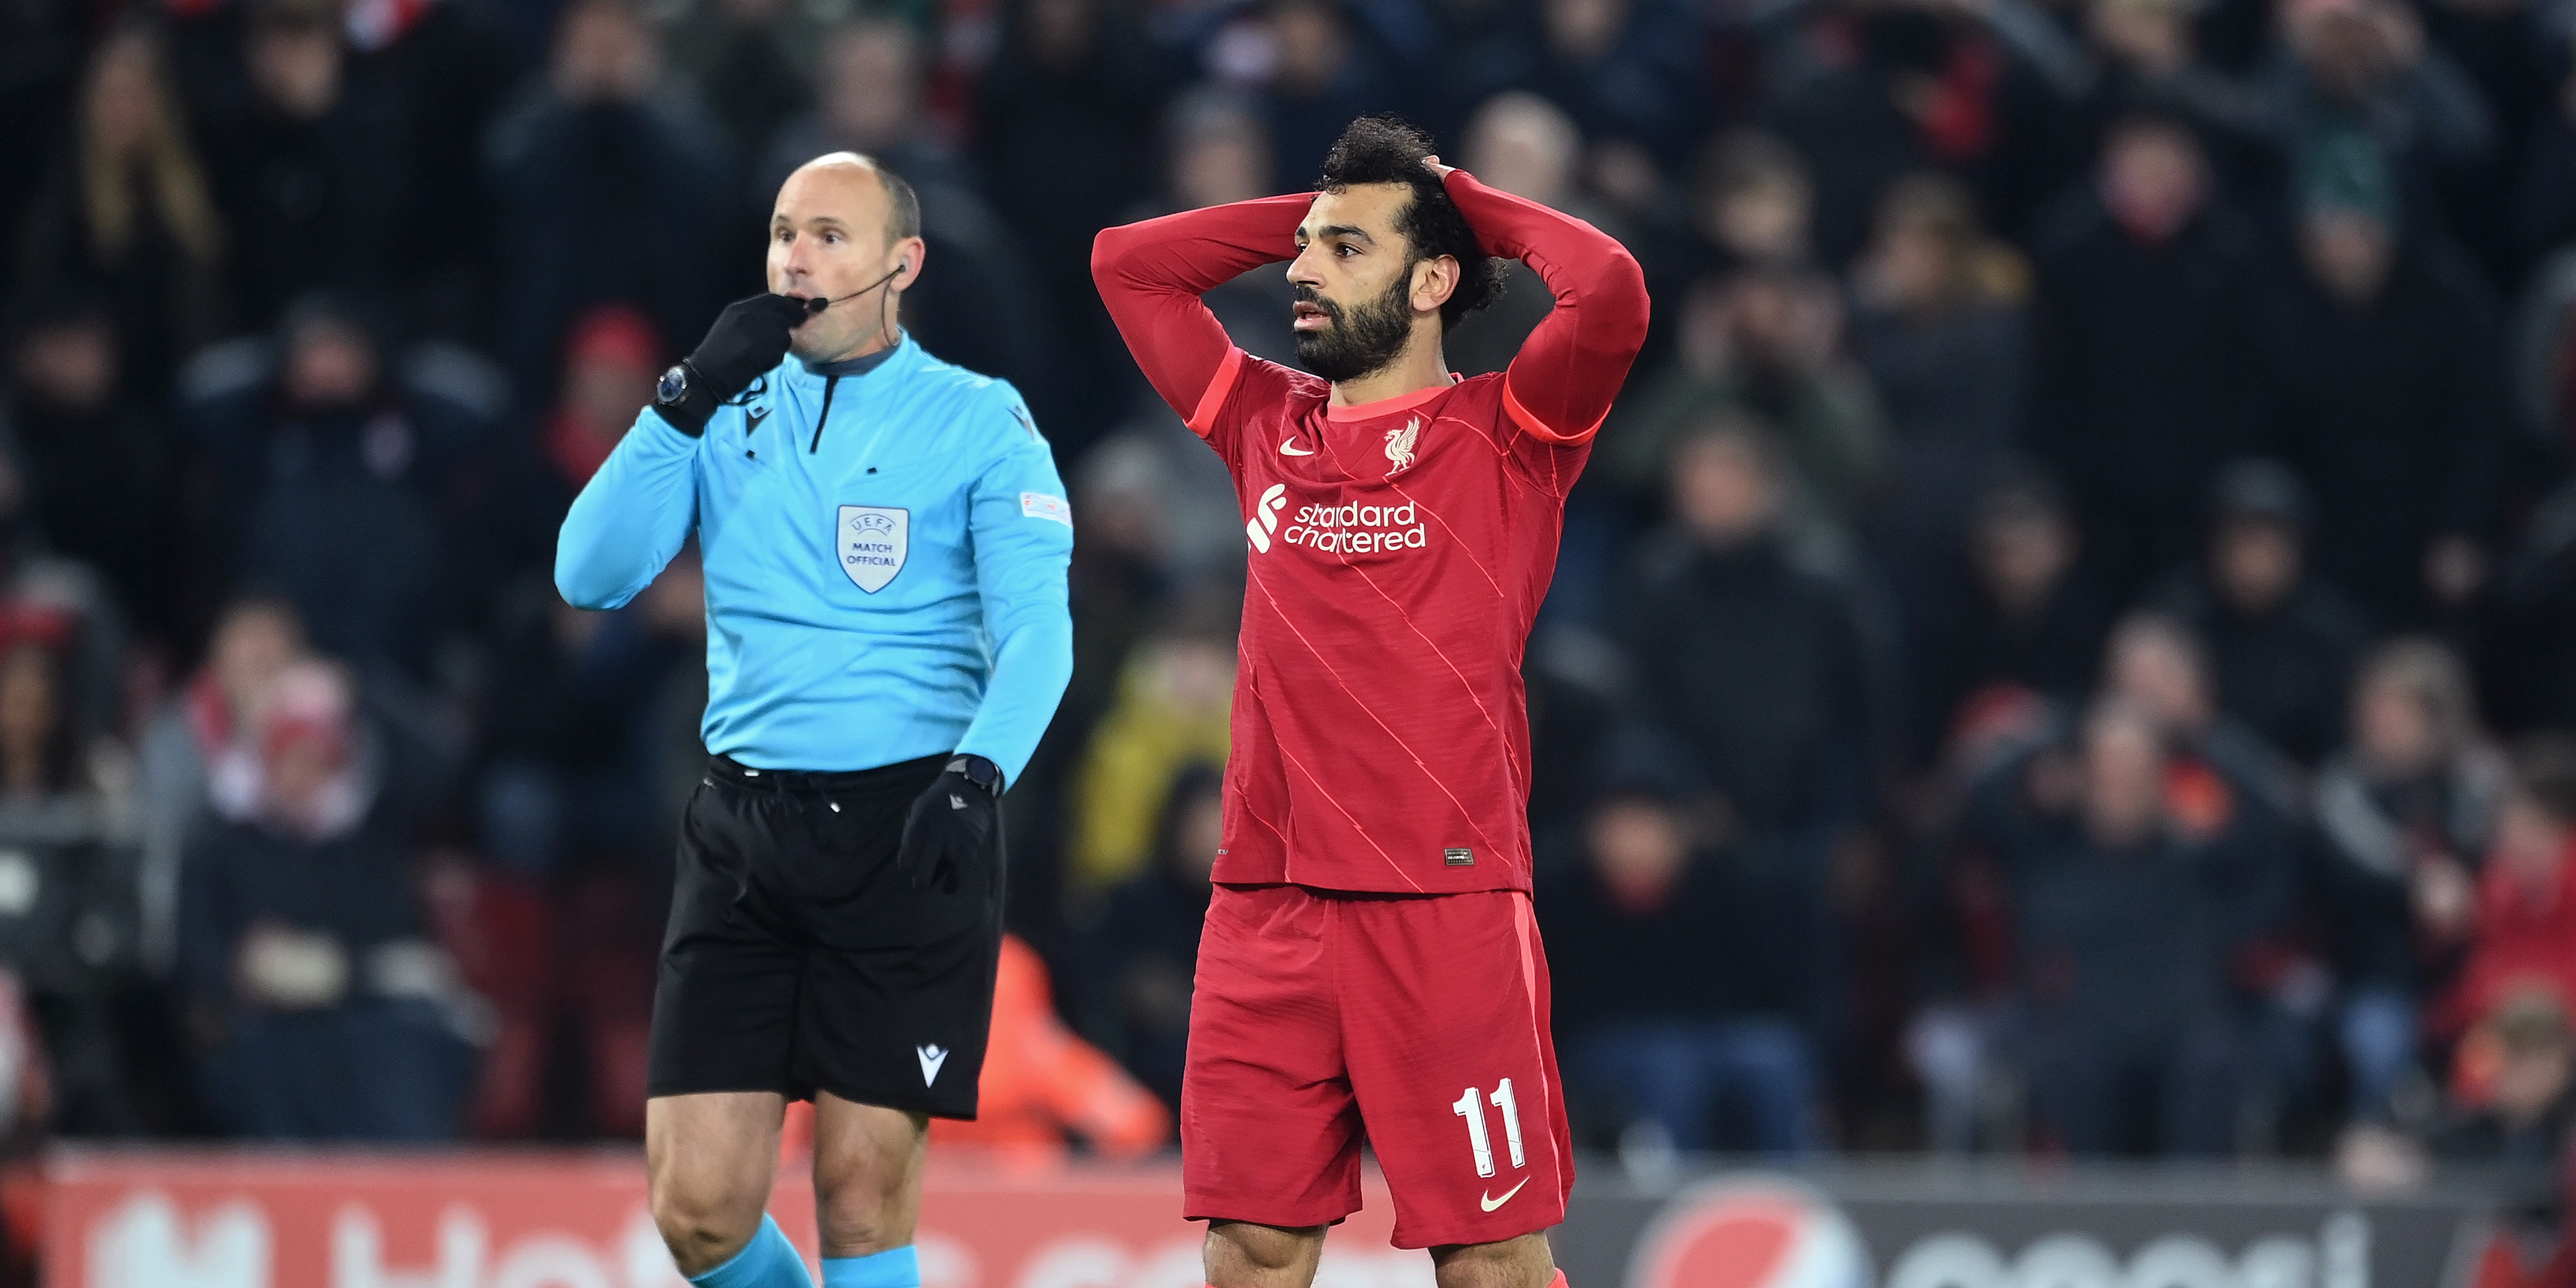 Bayern Munich star has a message for Liverpool’s owners over Mo Salah’s contract situation